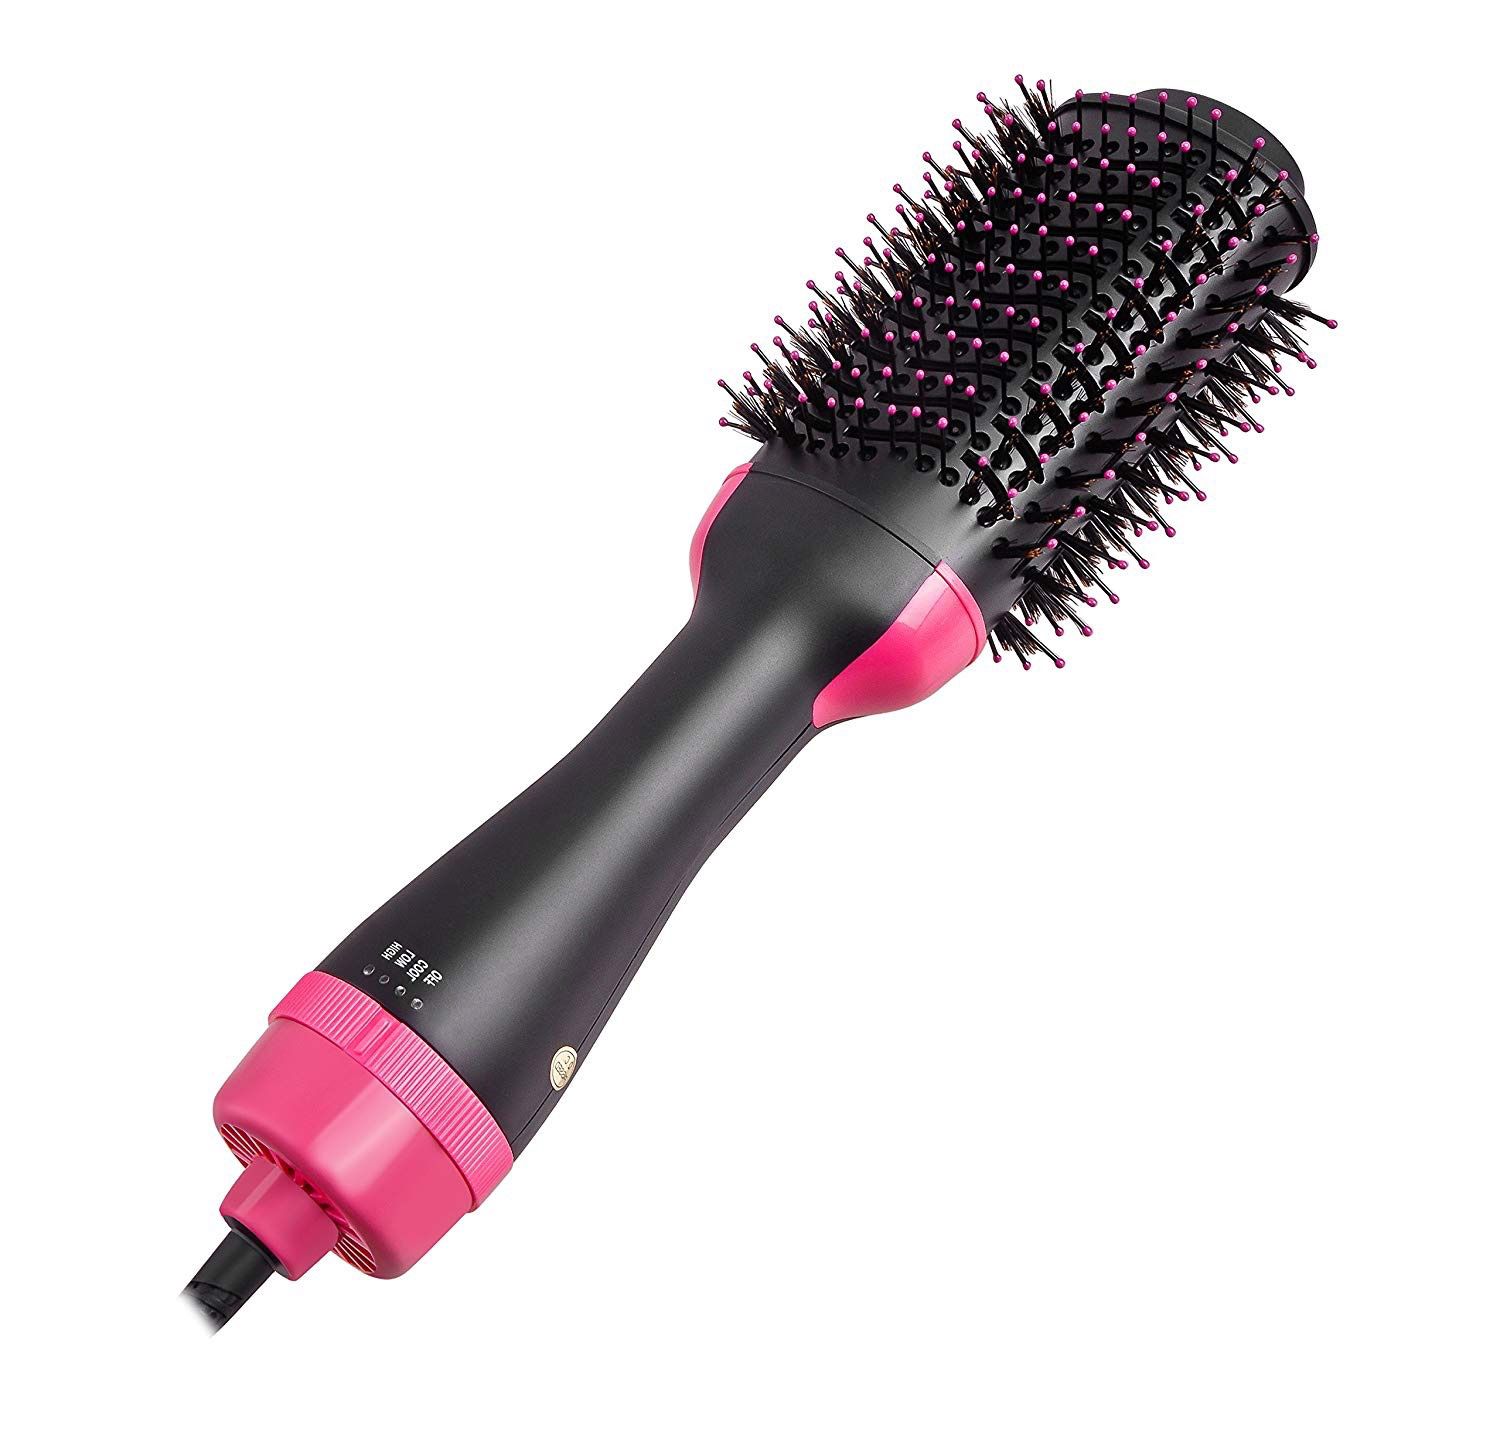 One Step Hair Dryer and Volumizer, szwintec Oval Blower Hair Dryer Salon Hot Air Paddle Styling Brush Negative Ion Generator Hair Straightener Curler